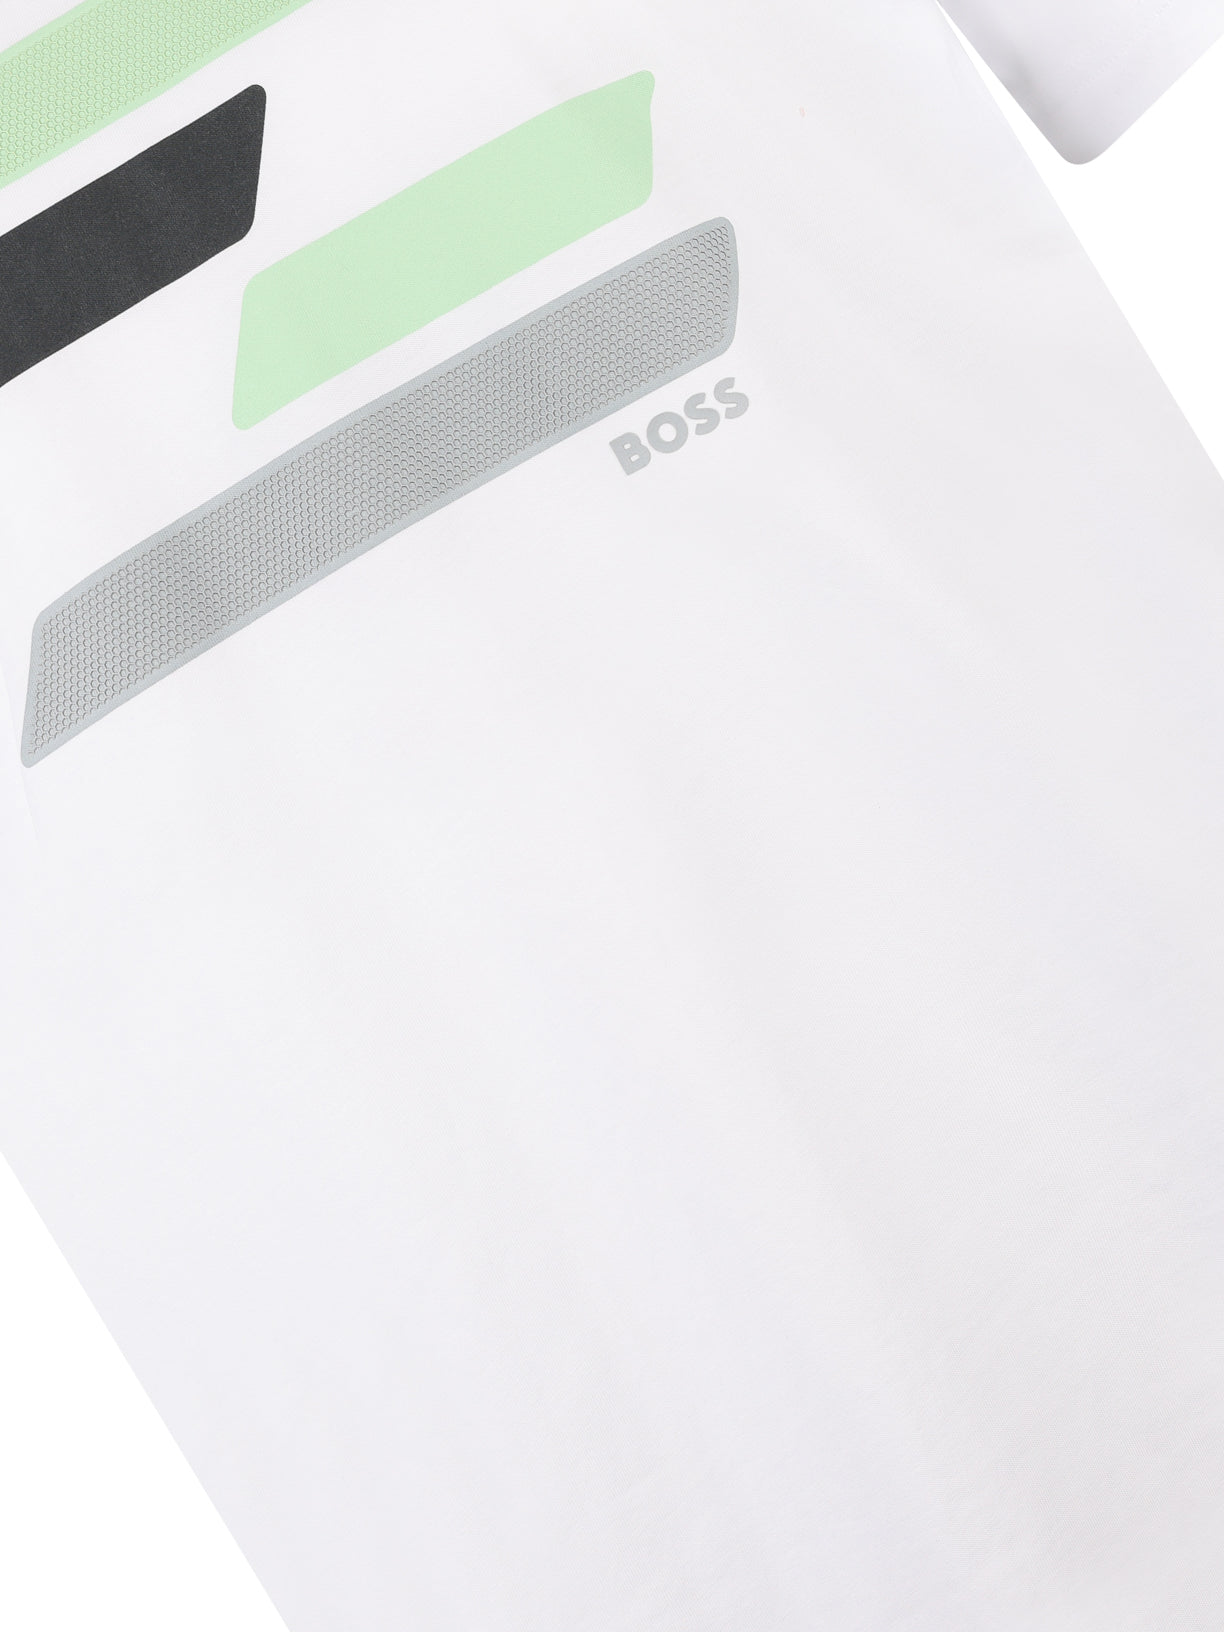 Load image into Gallery viewer, Hugo Boss Tee 3 White
